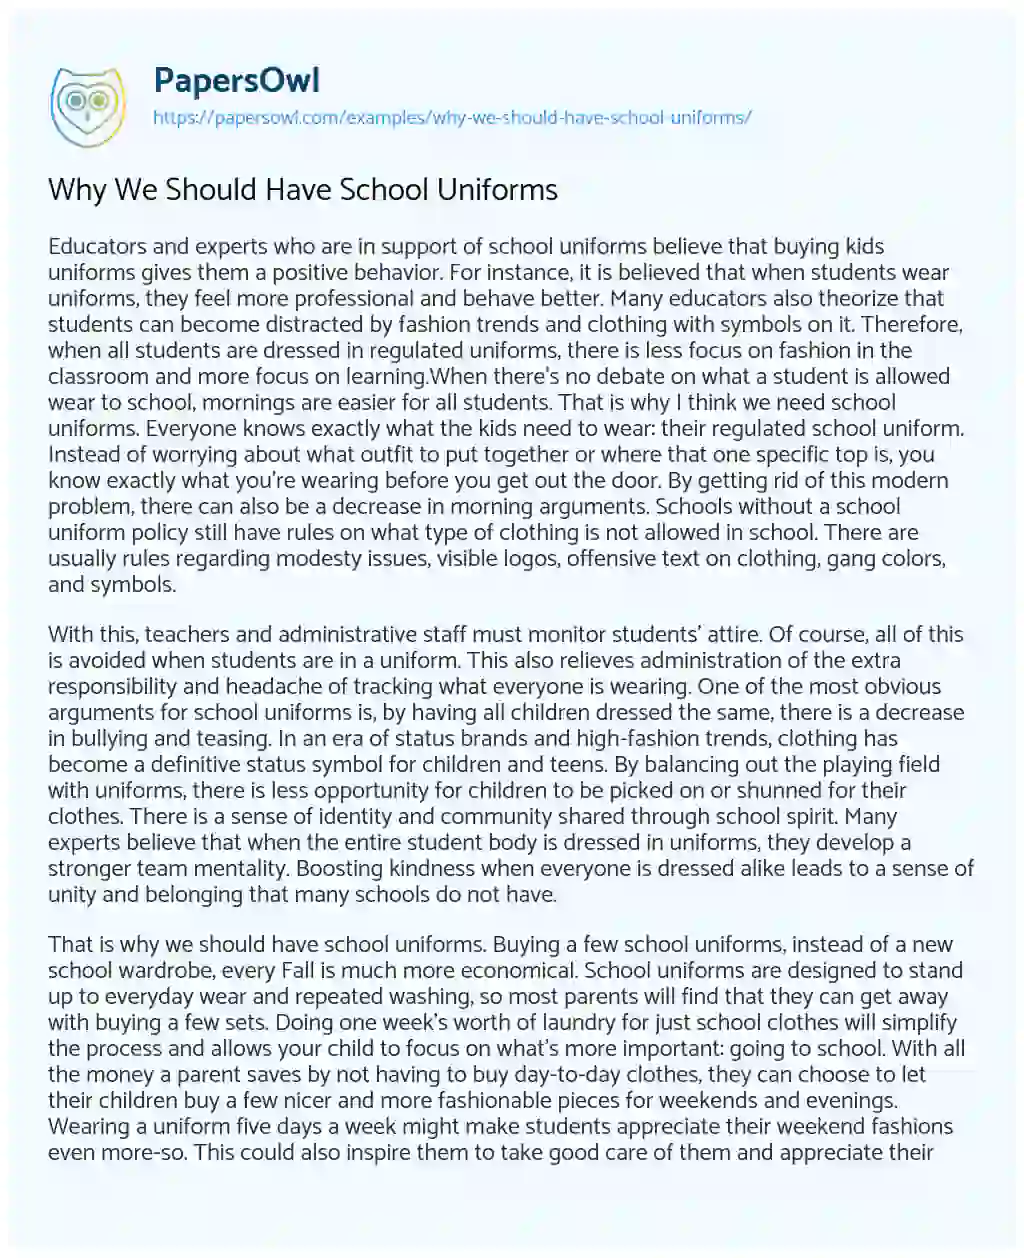 Essay on Why we should have School Uniforms